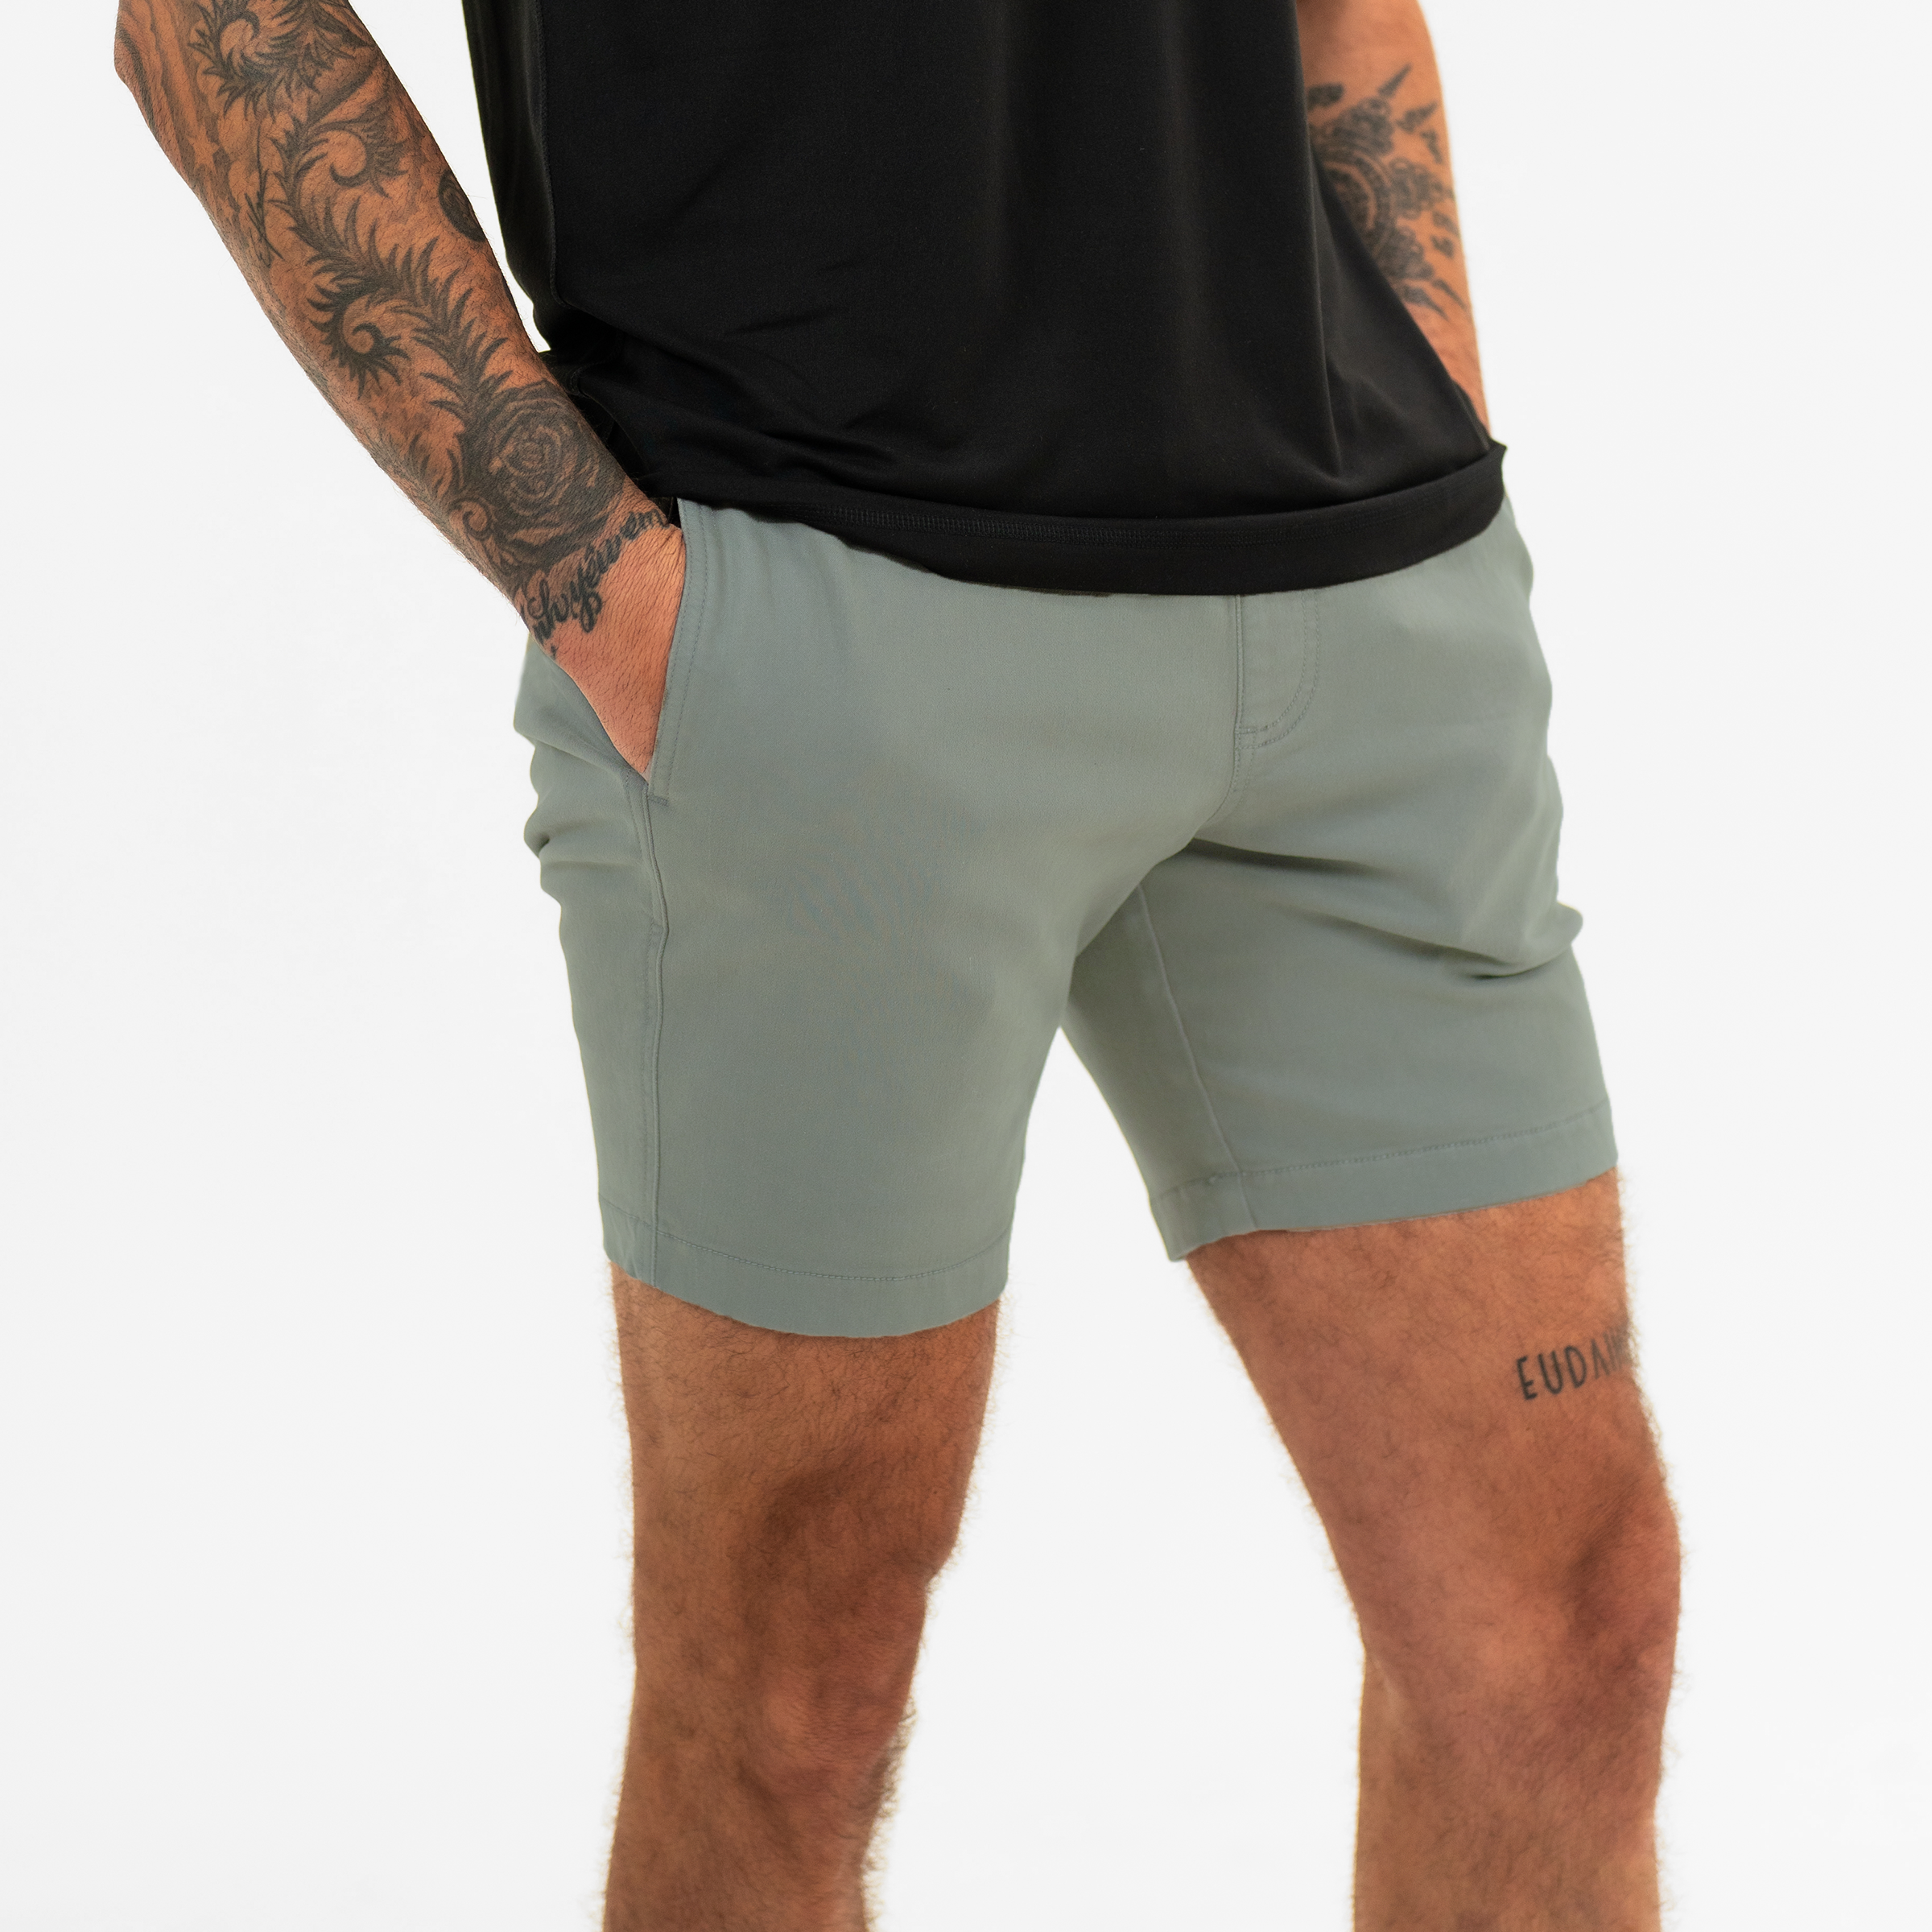 Alto Short 7" inseam in Grey side on model  with elastic waistband, fabric drawstring, faux fly, and two front side seam pockets